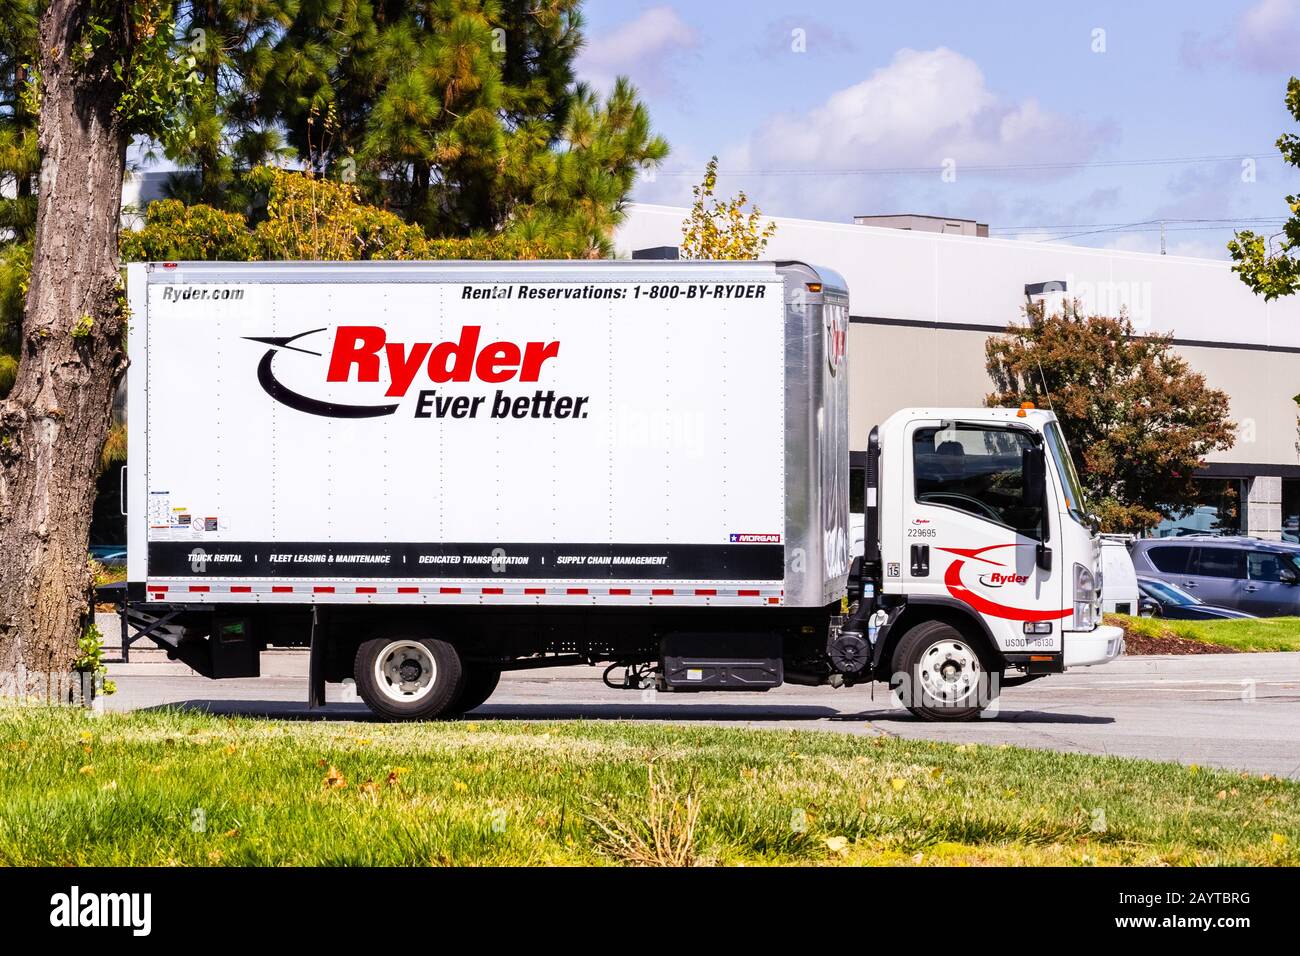 Sep 16, 2019 Fremont / CA / USA - Ryder truck driving on a street in East San Francisco Bay Area; Ryder System, Inc. is an American provider of transp Stock Photo